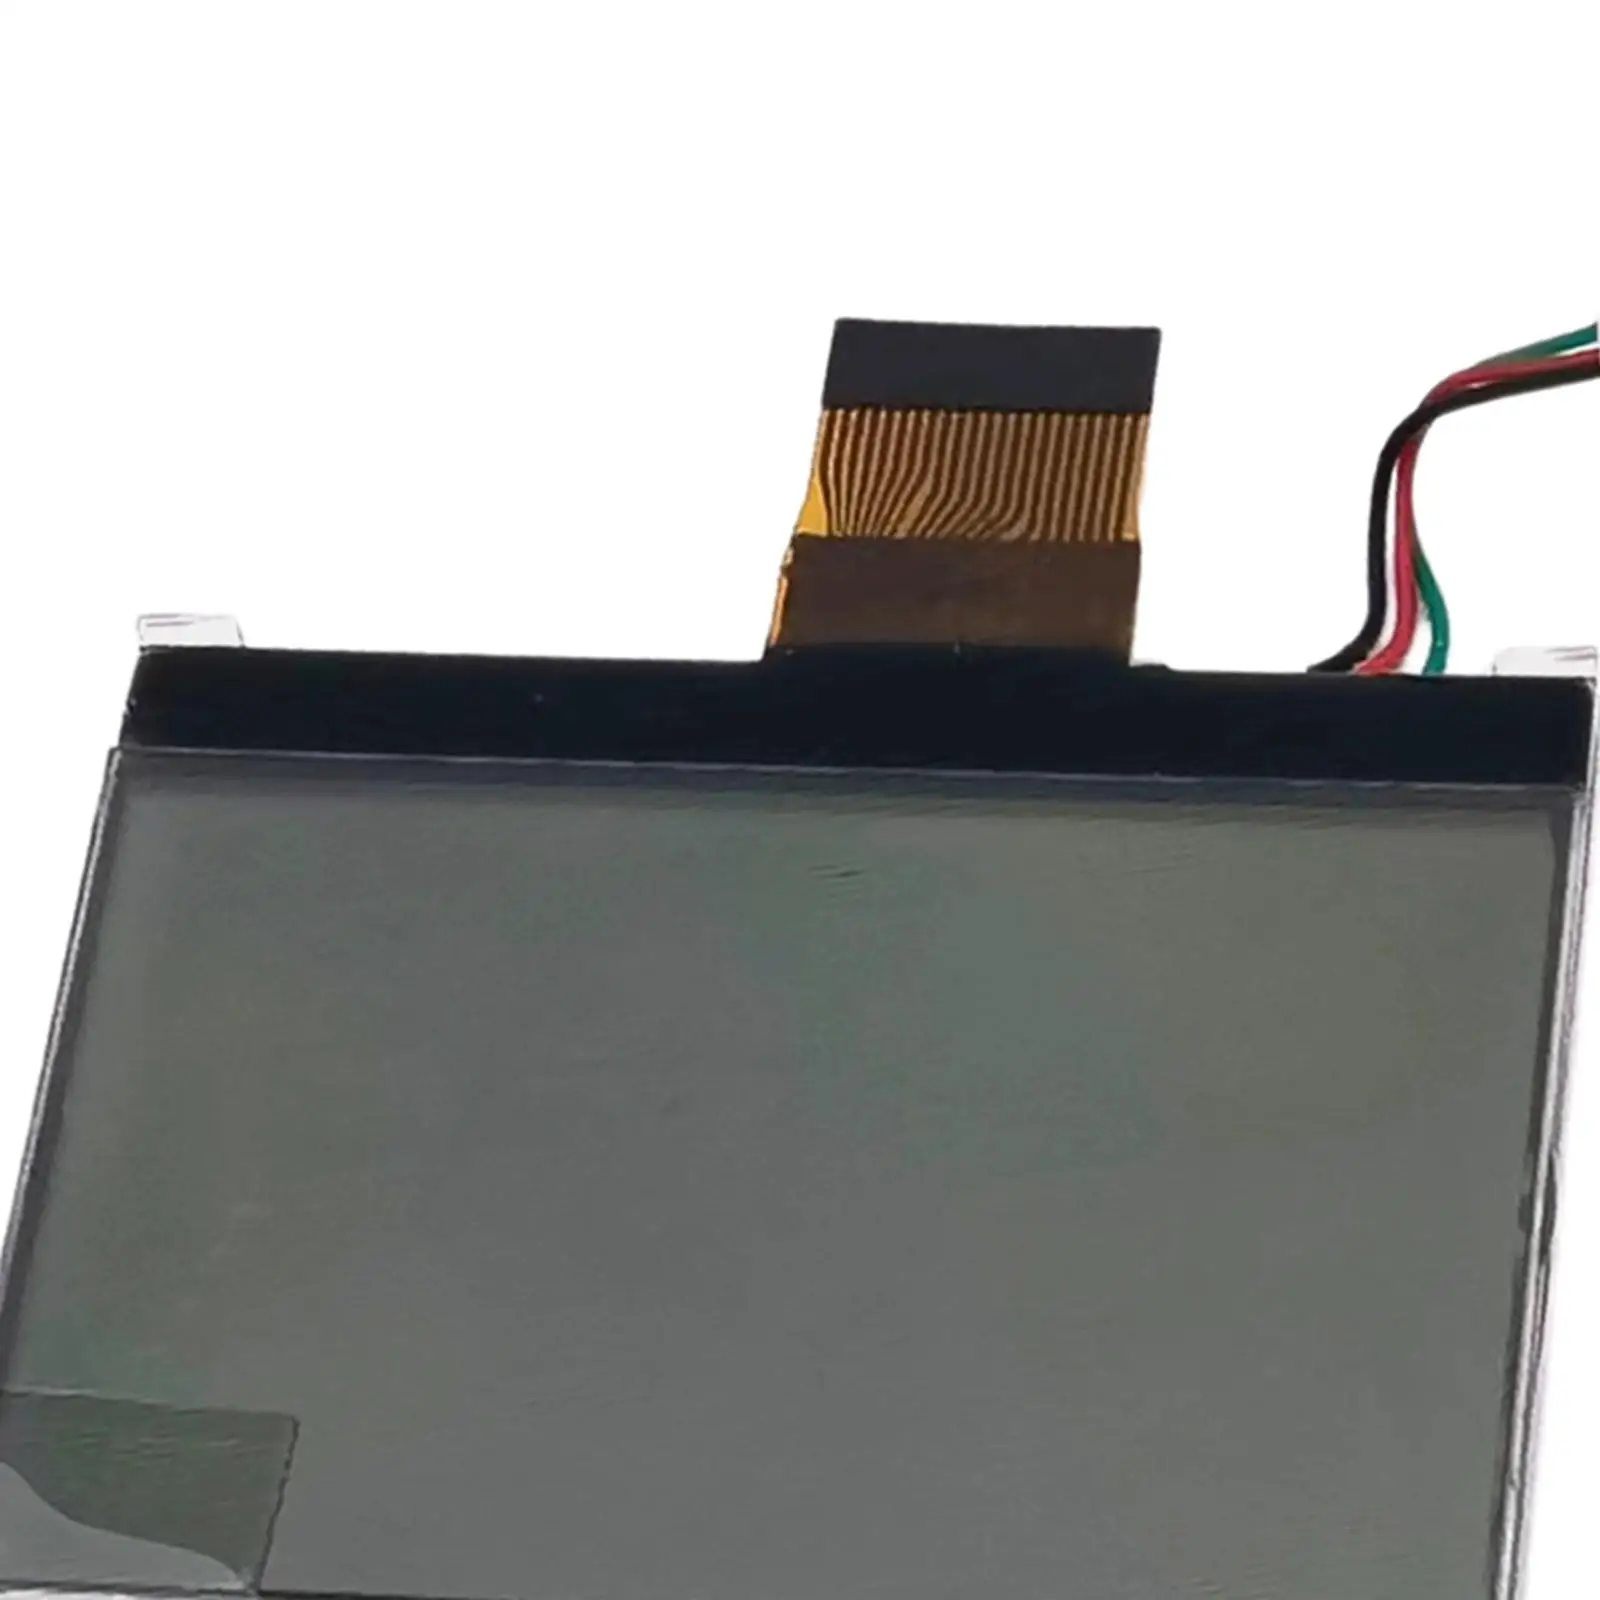 LCD Display Screen High Quality Directly Replace Flash Repair Part for V860 TT685 V860II AD360II Accessory